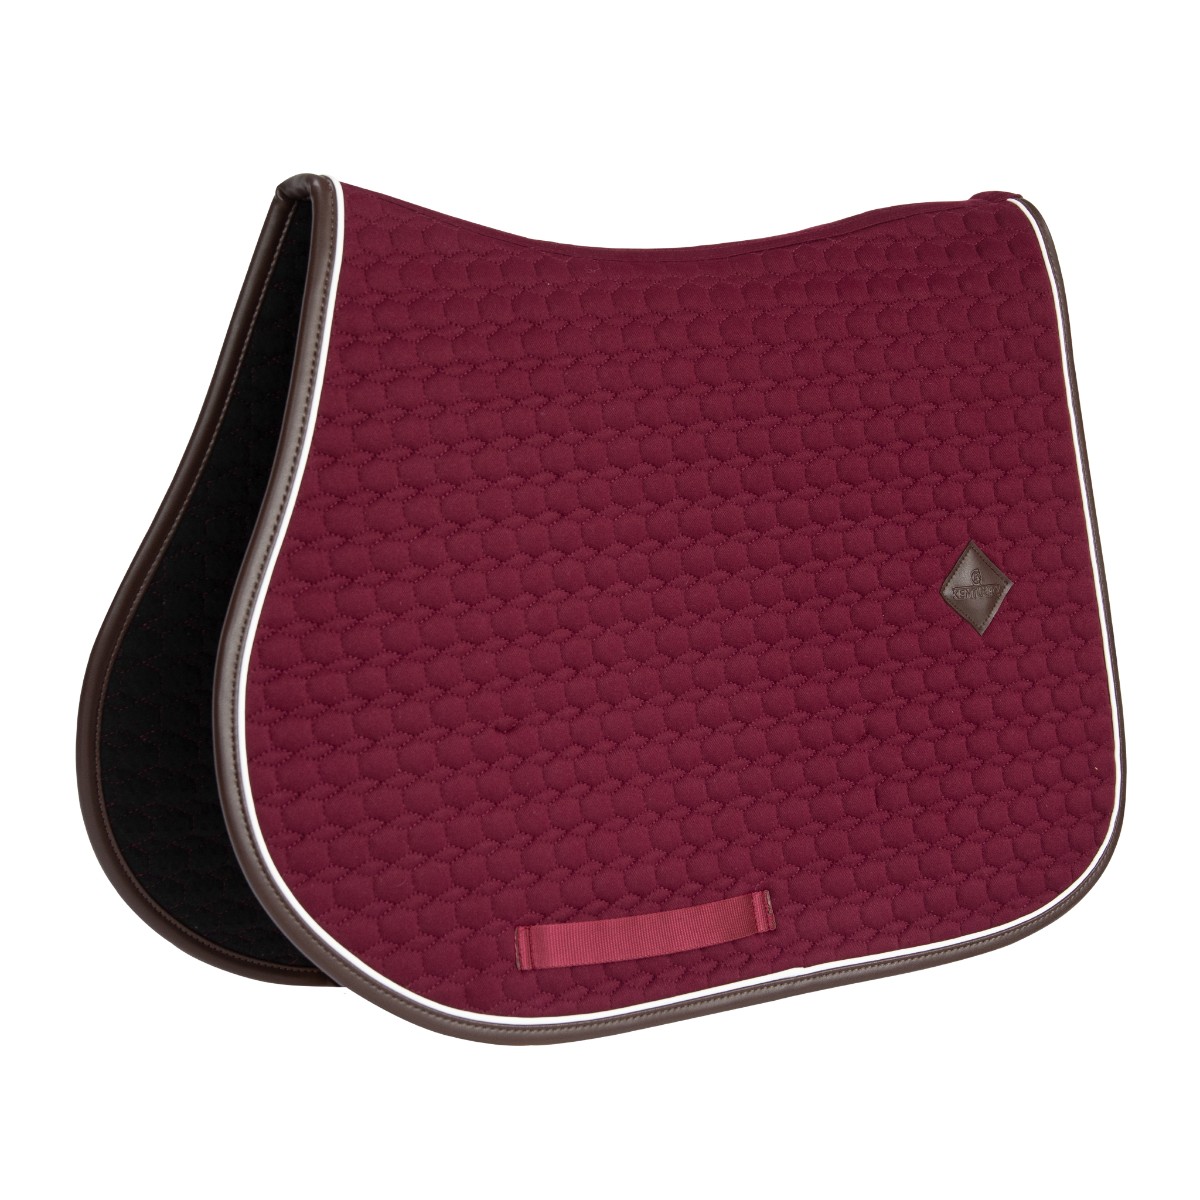 tapis classic leather Jumping Bordeaux Kentucky Horsewear Sellerie En Cadence Montfort l'Amaury textile cheval saddle pad